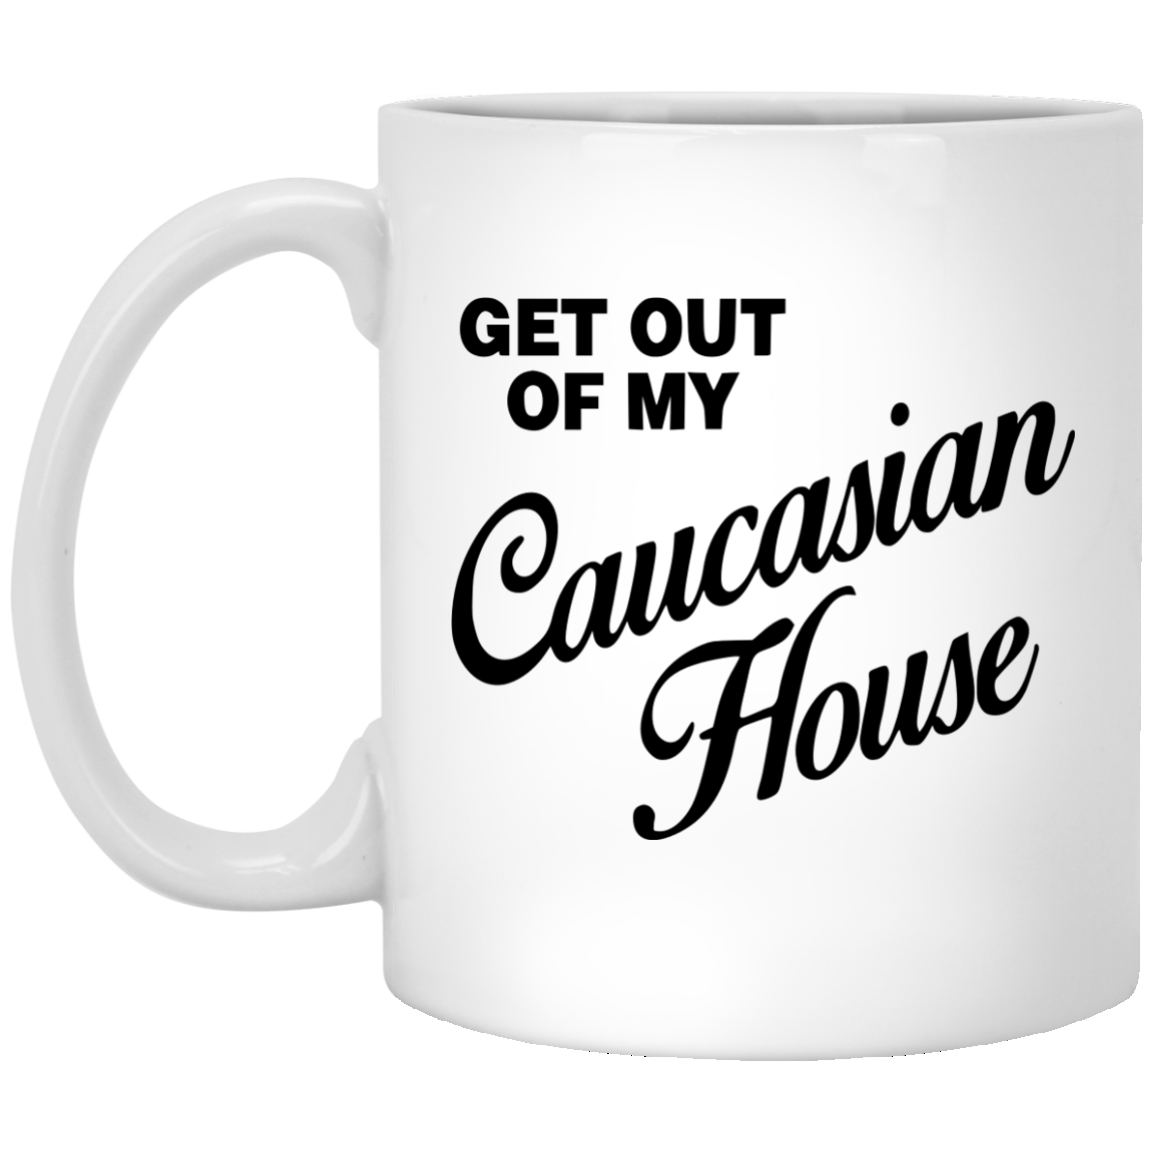 Get out of my Caucasian House mug